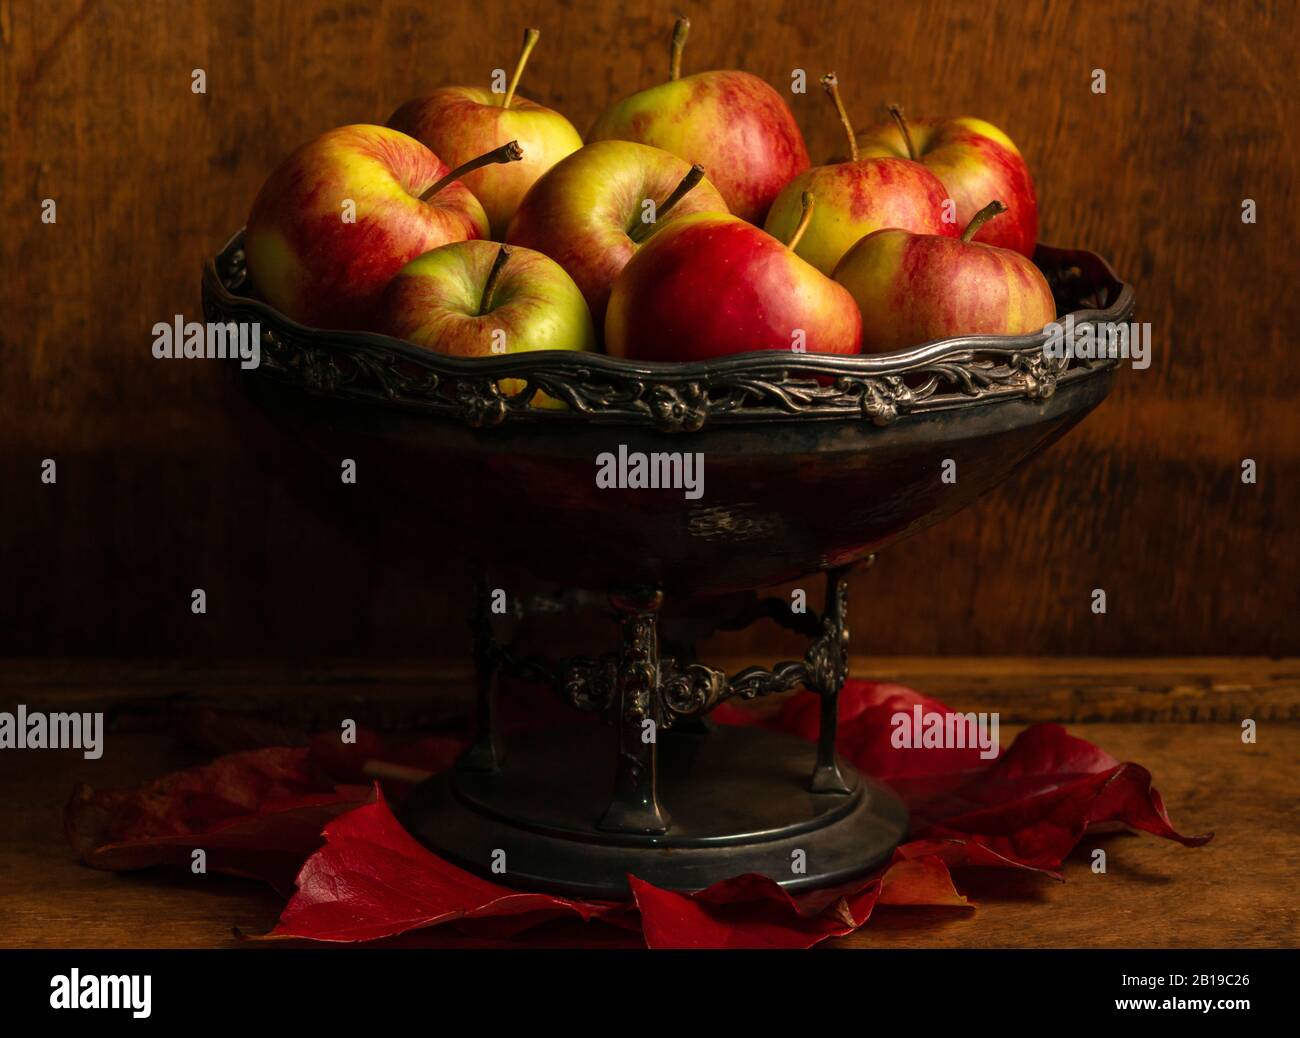 Pile of apples in metal vintage basket as still life composition Stock Photo